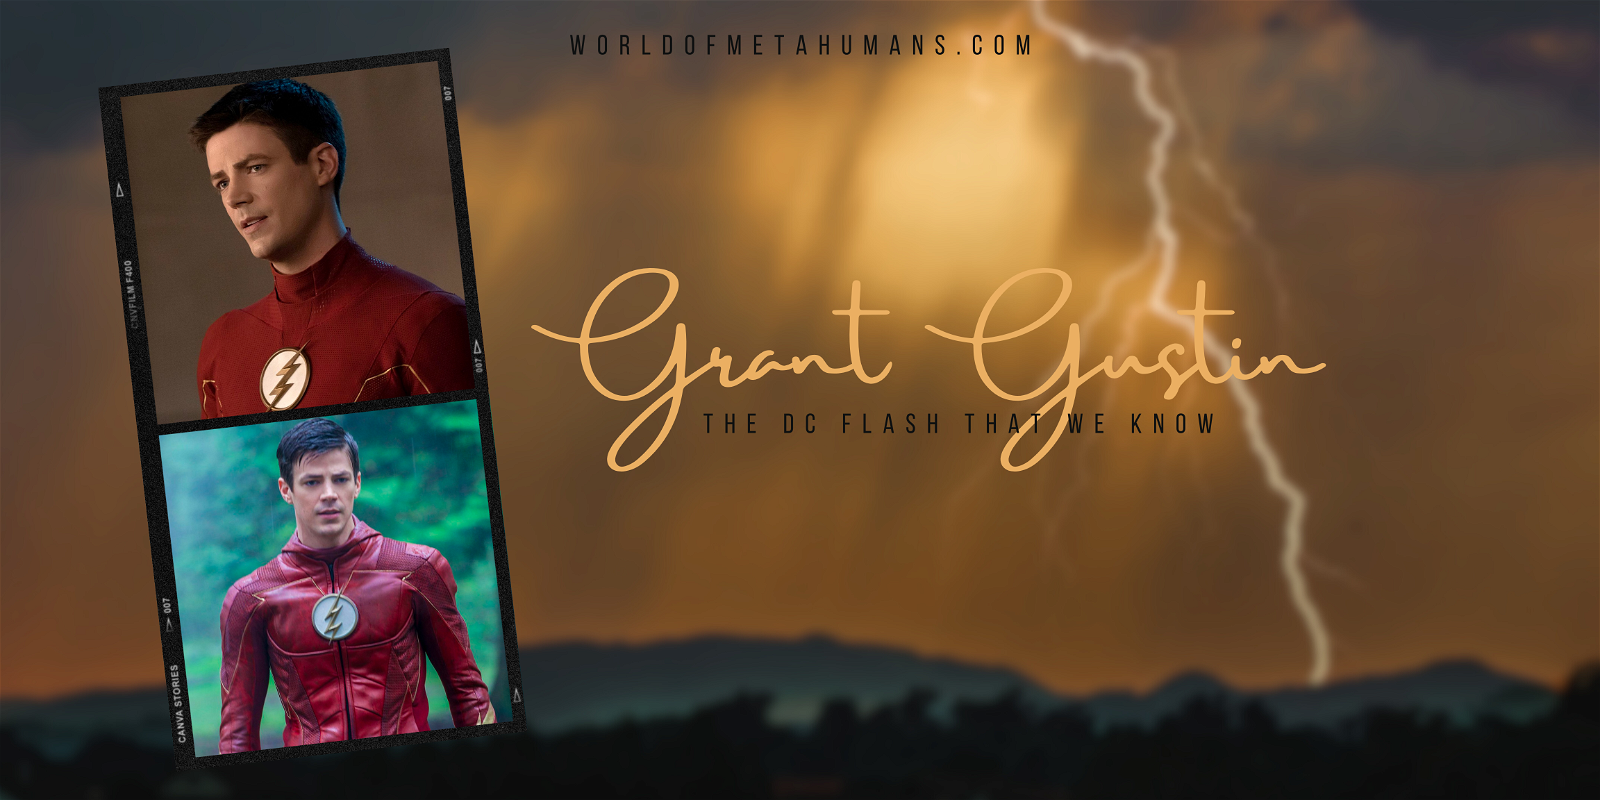 Grant Gustin: The DC Flash That We Know